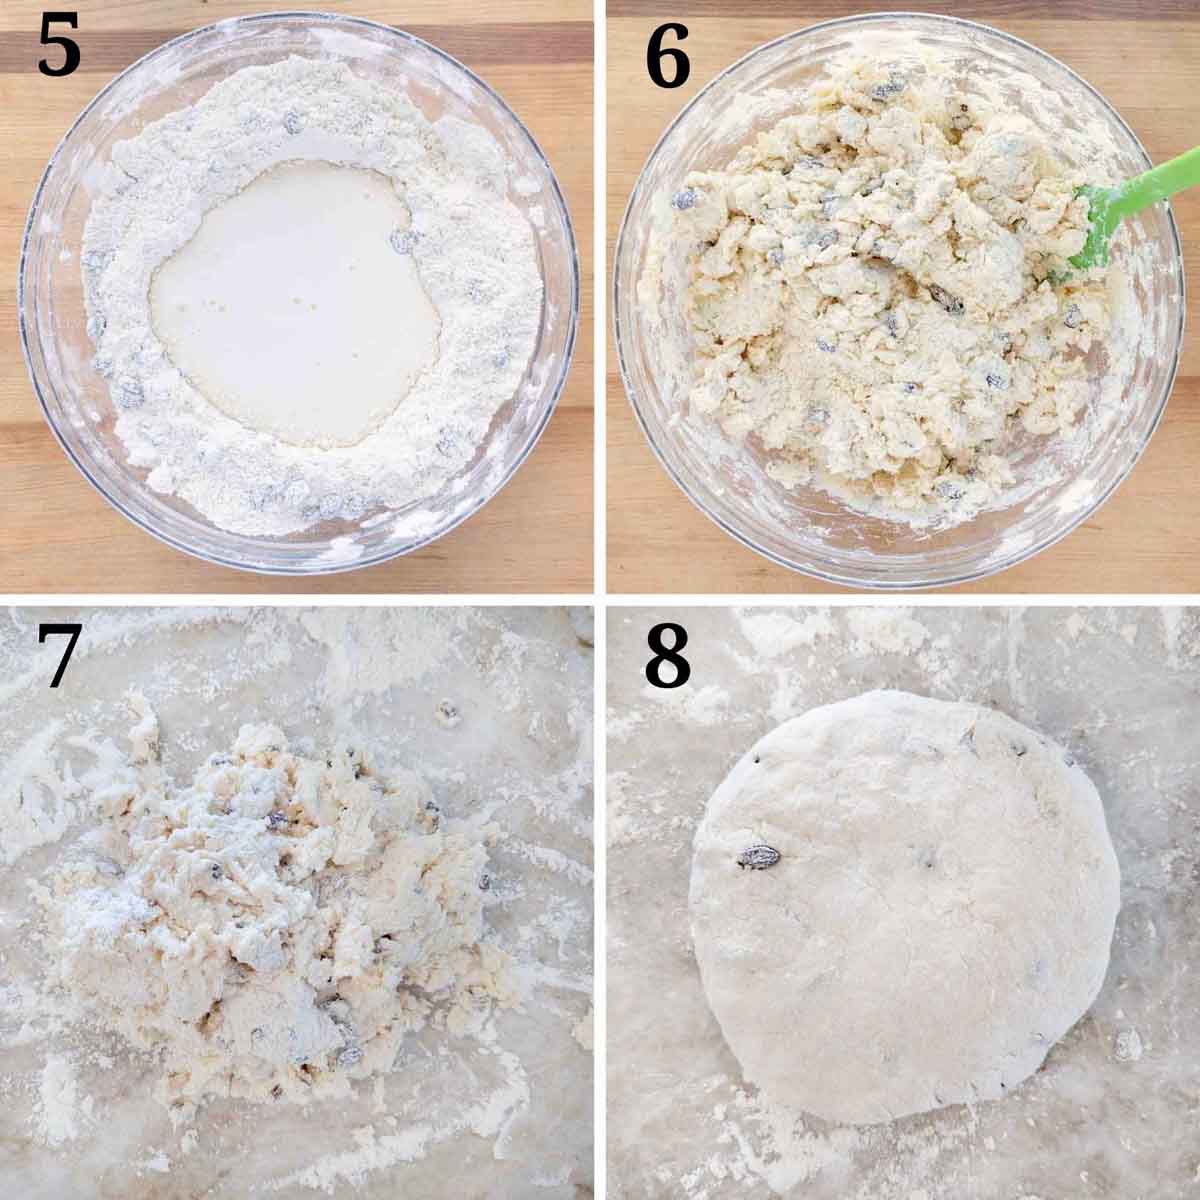 images showing how to finish making irish soda bread